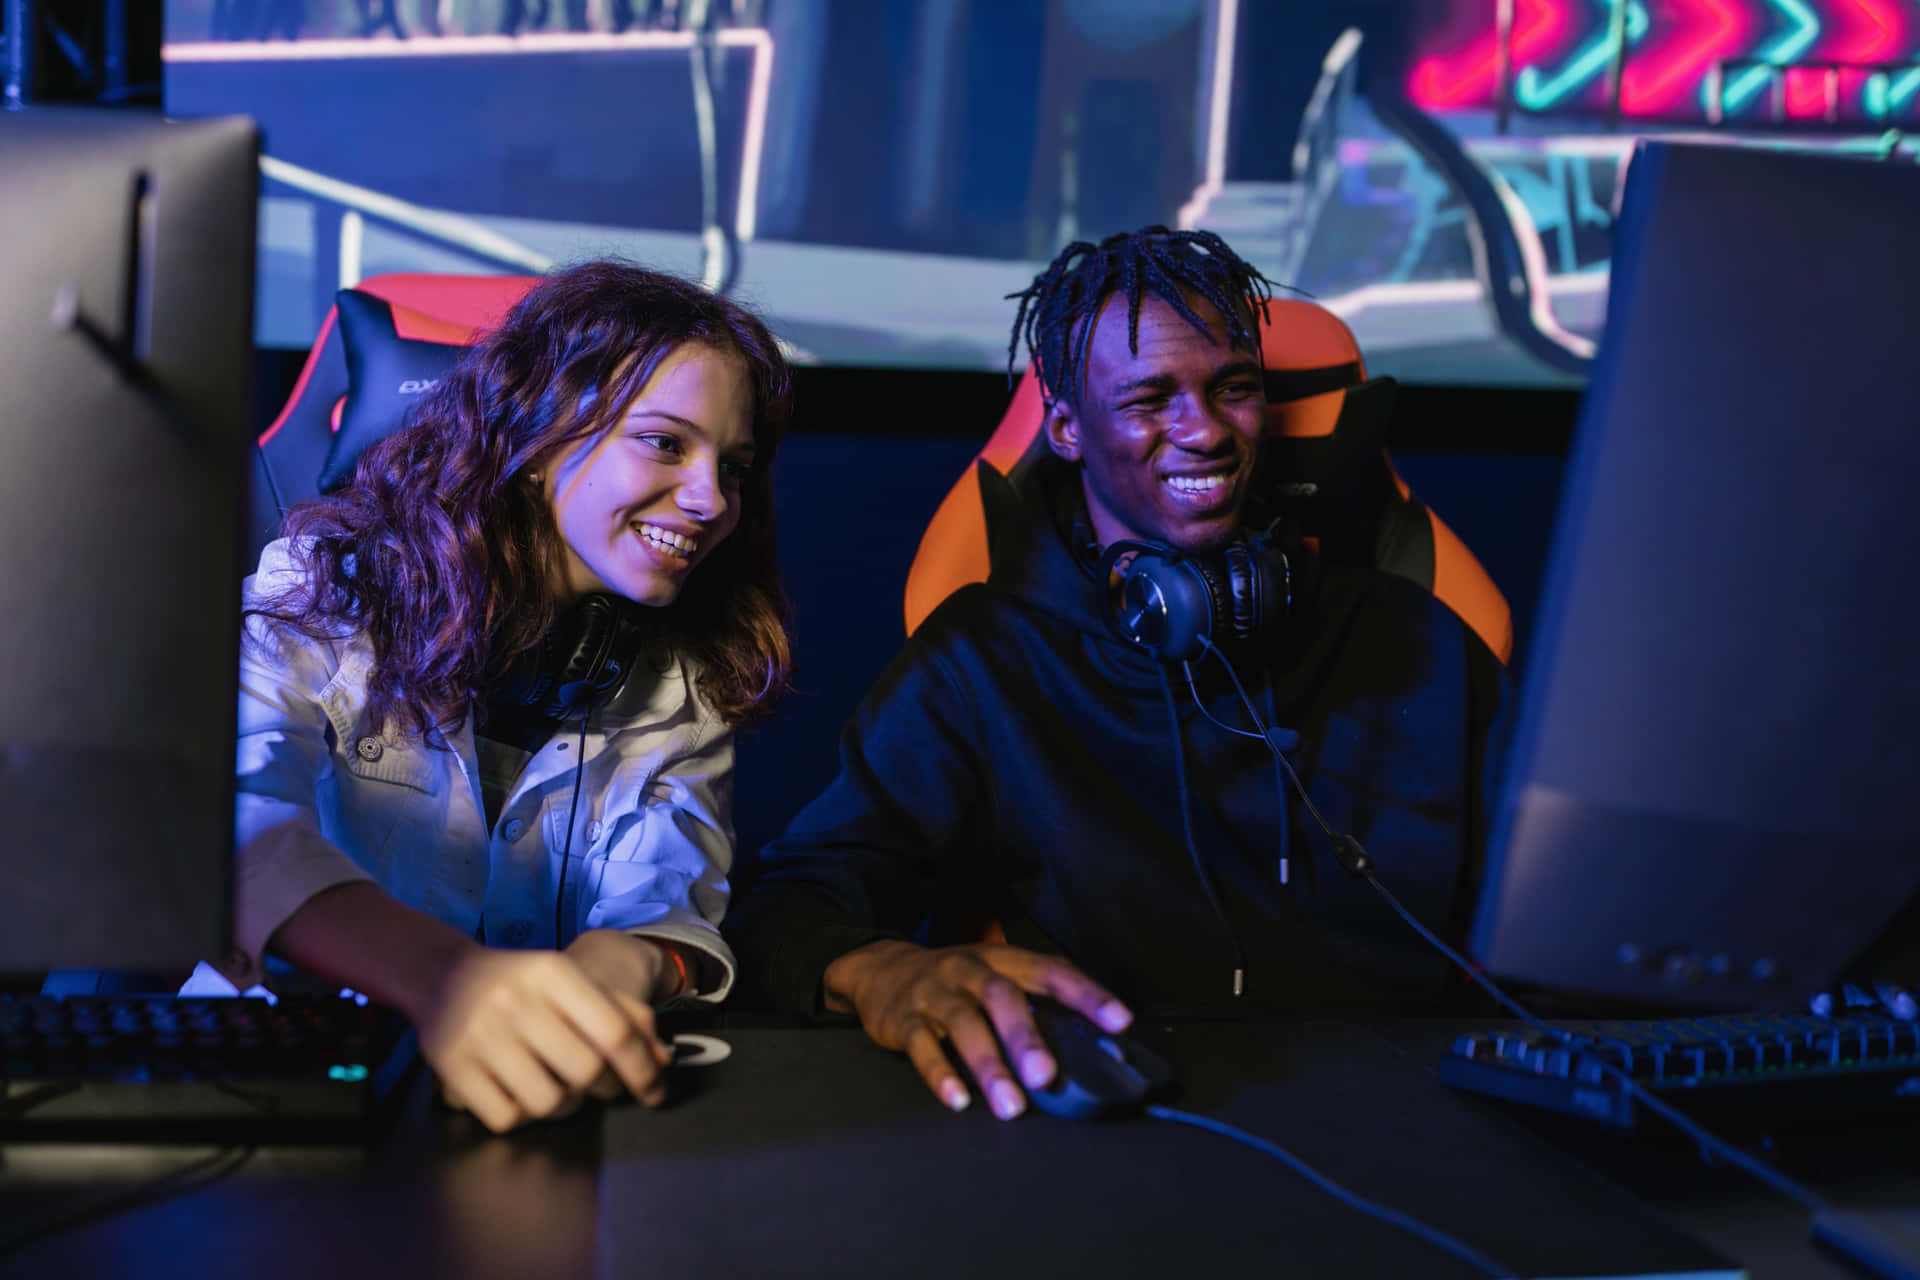 Two People Playing Video Games In A Gaming Room